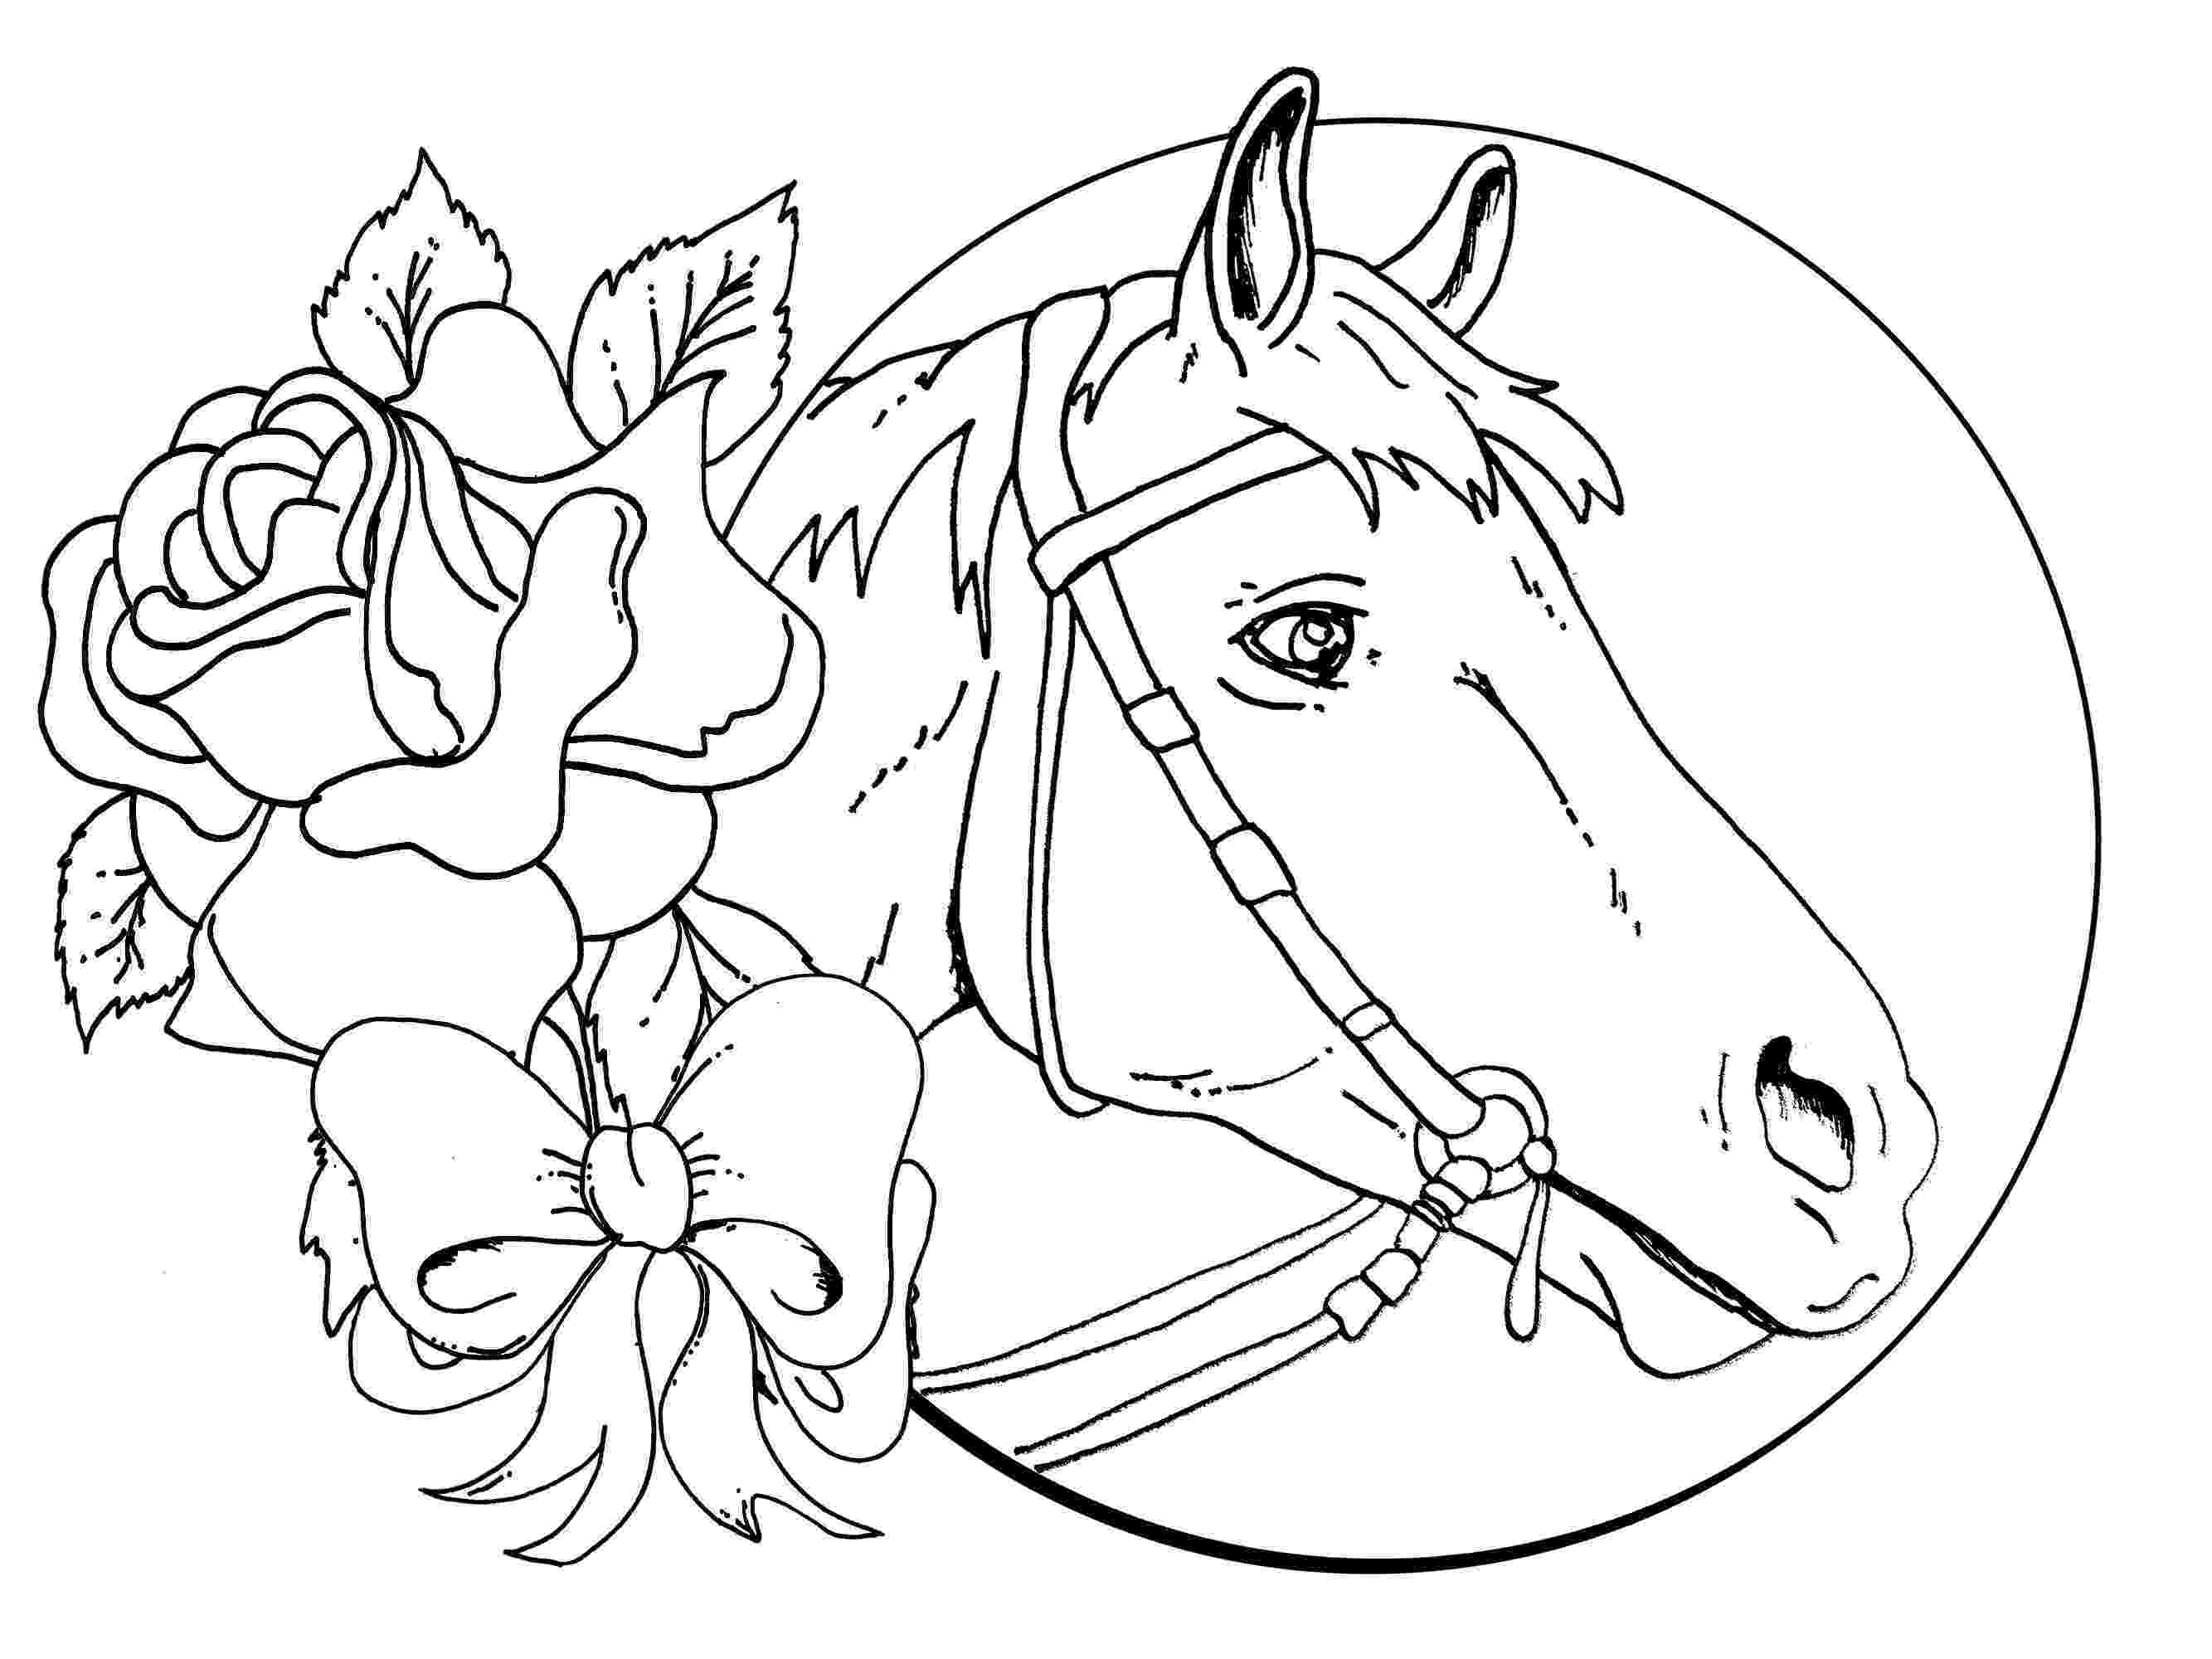 horse colouring pages for adults 5 fantasy horse coloring pages stamping colouring for pages horse adults 